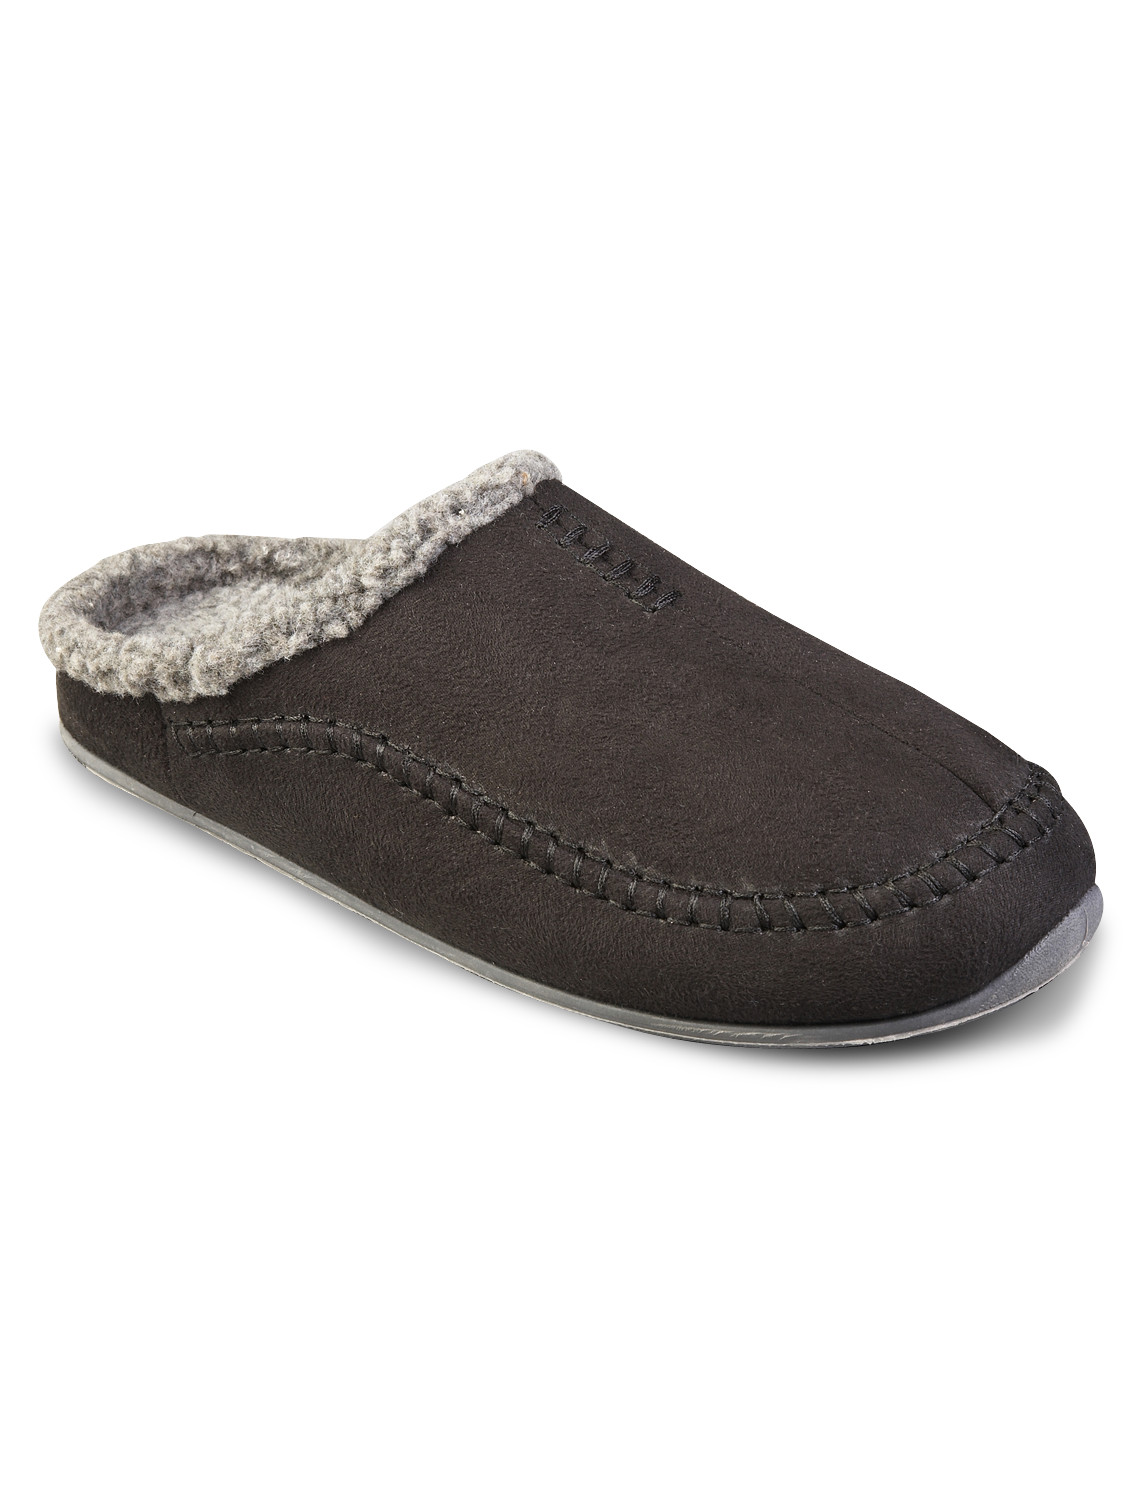 men Casual tall Deer Big & big Tall Slippers for and Male Nordic slippers Stags XL about Details